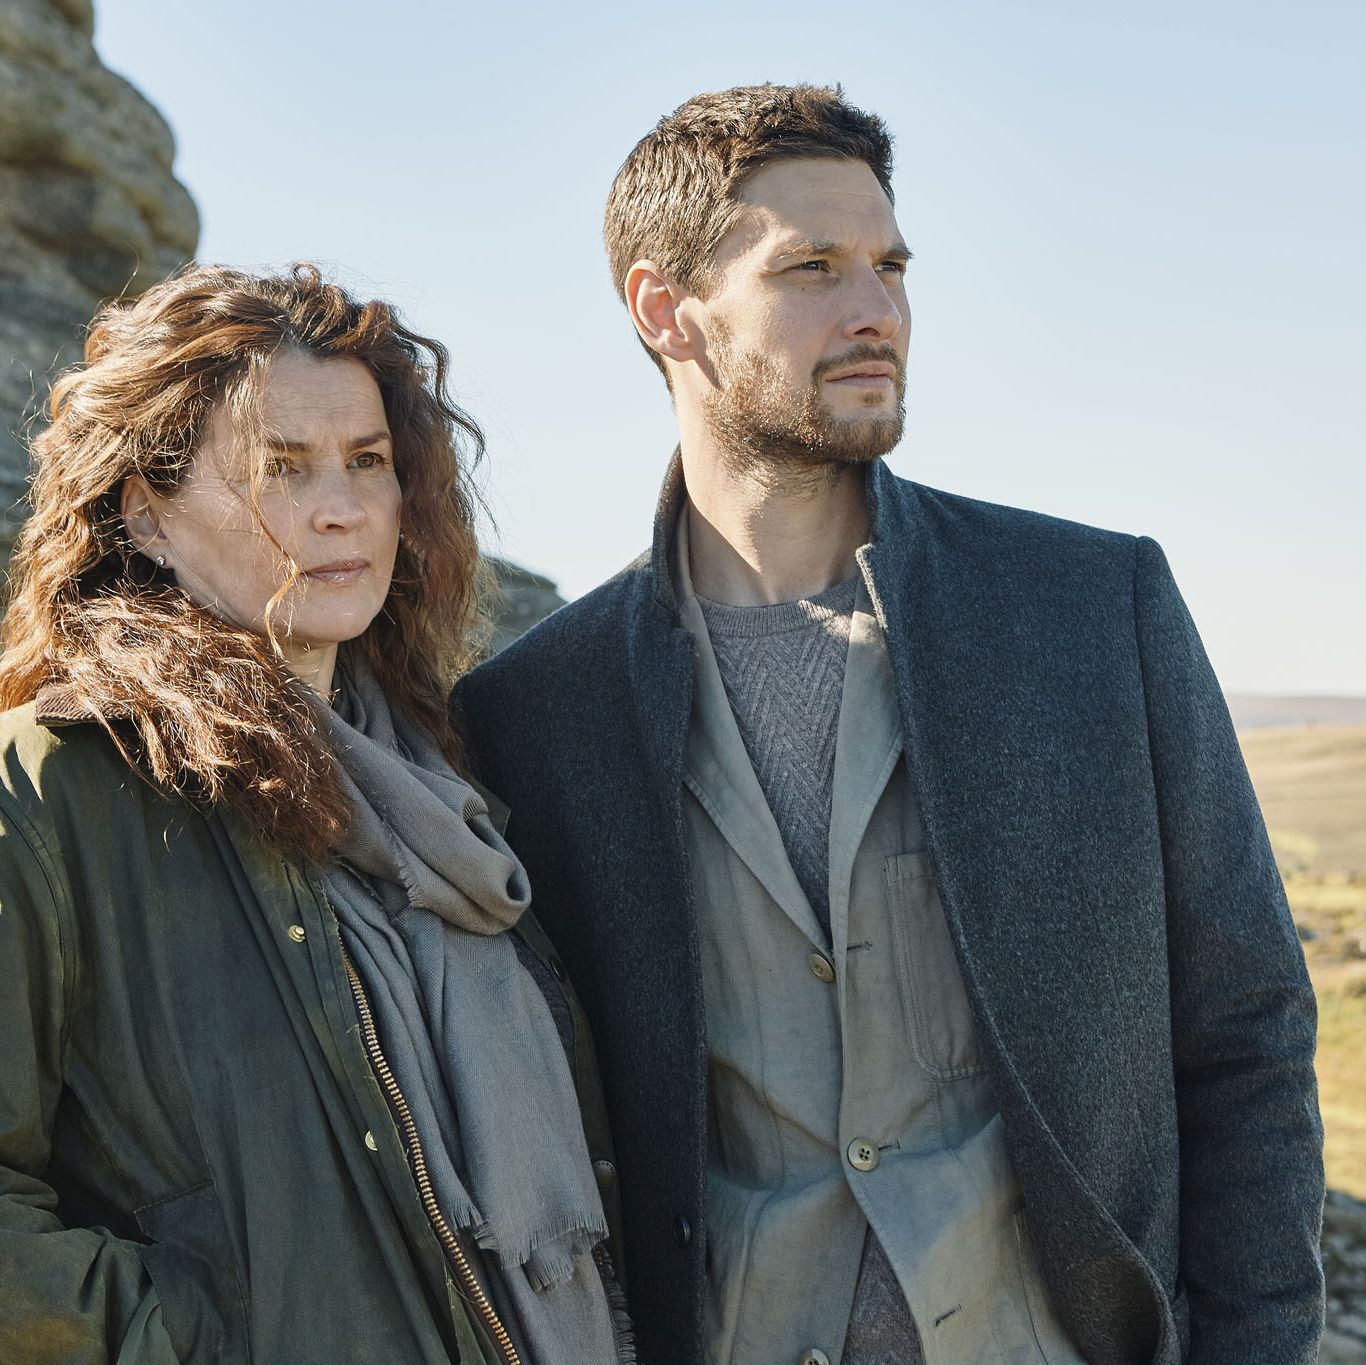 Gold Digger, Series Premiere, What's mine is yours and what's yours is  mine, secrets included. Ben Barnes and Julia Ormond star in #GoldDigger  premiering Sunday at 9/6p on CTV Drama